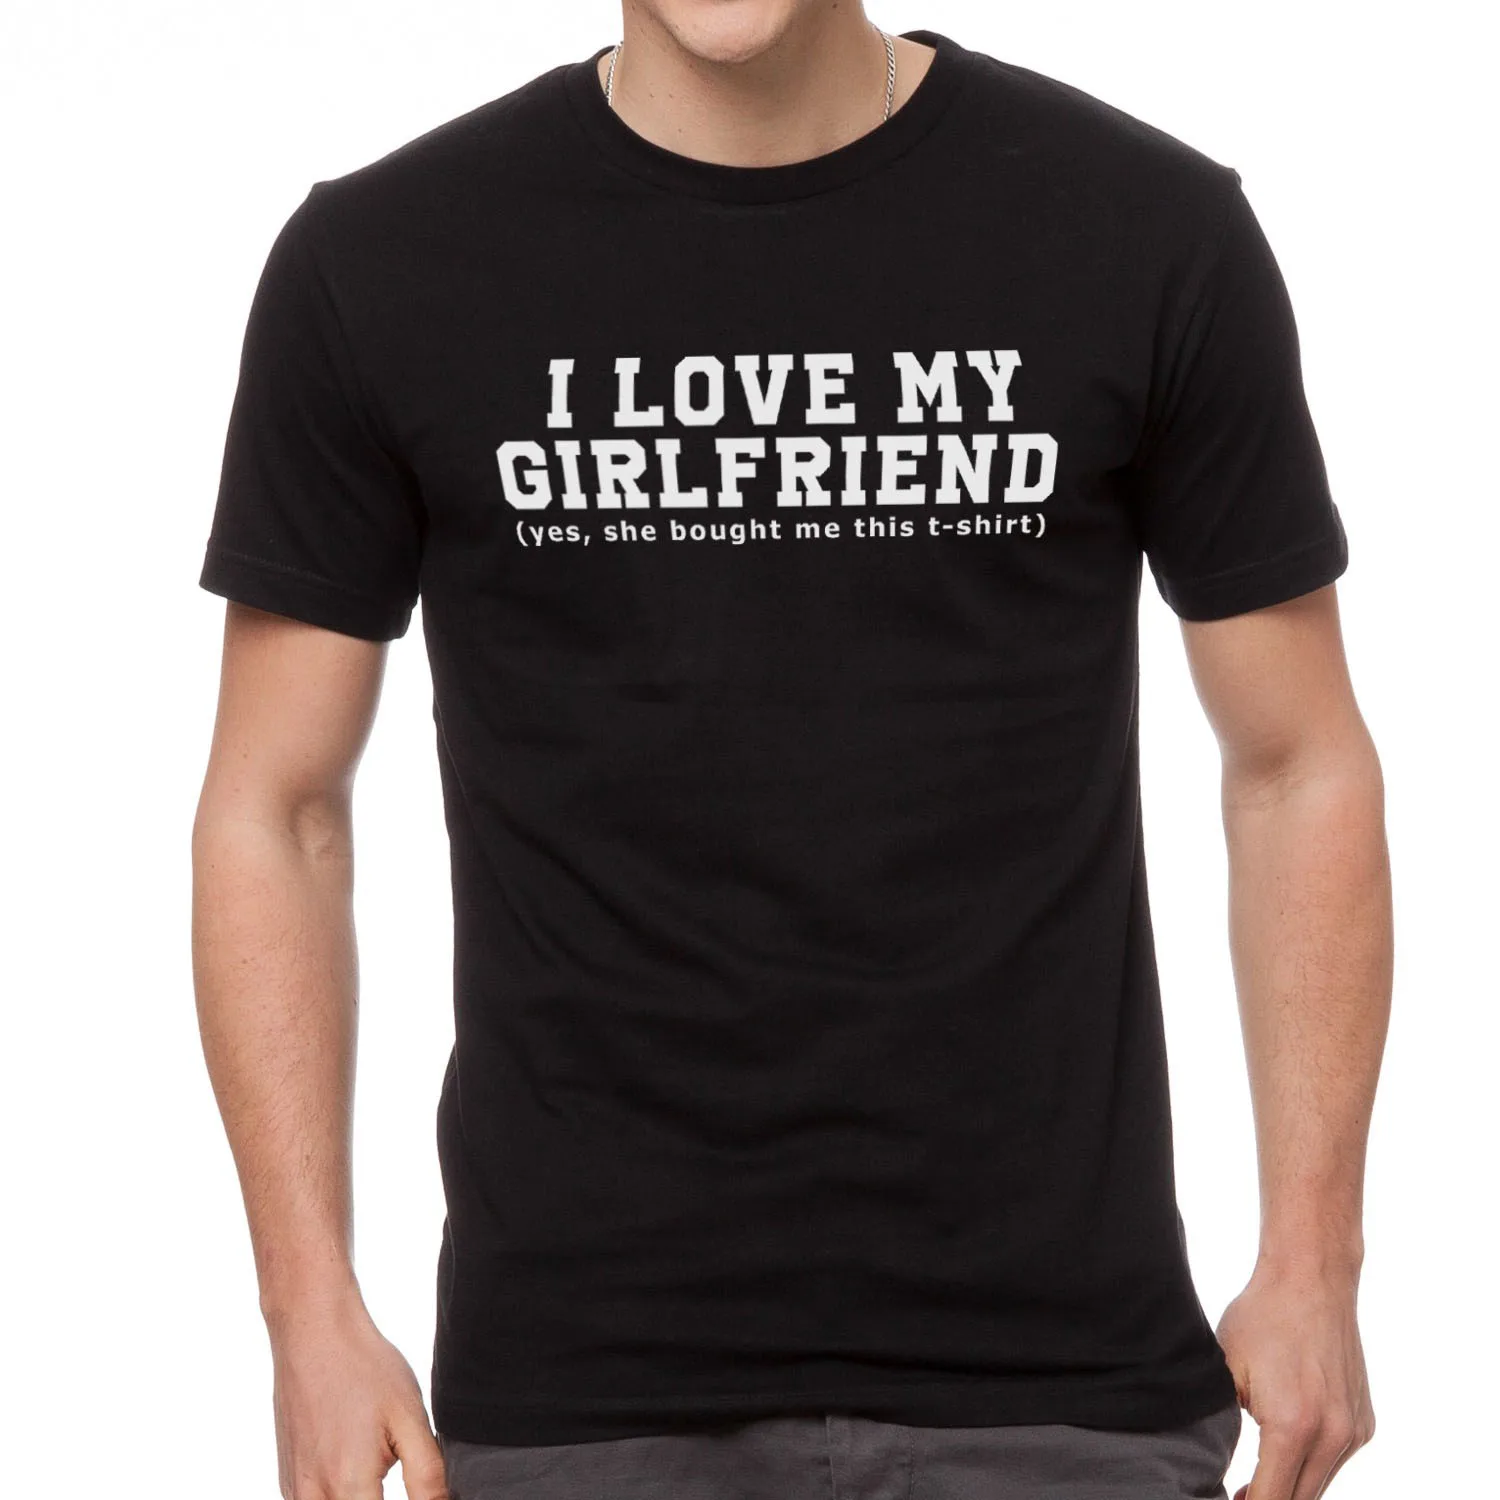 

I LOVE MY GIRLFRIEND Letters Print Men Black Tees Casual Funny Short Sleeve White Vintage Tee Shirt Clothes for Male Top Hipster